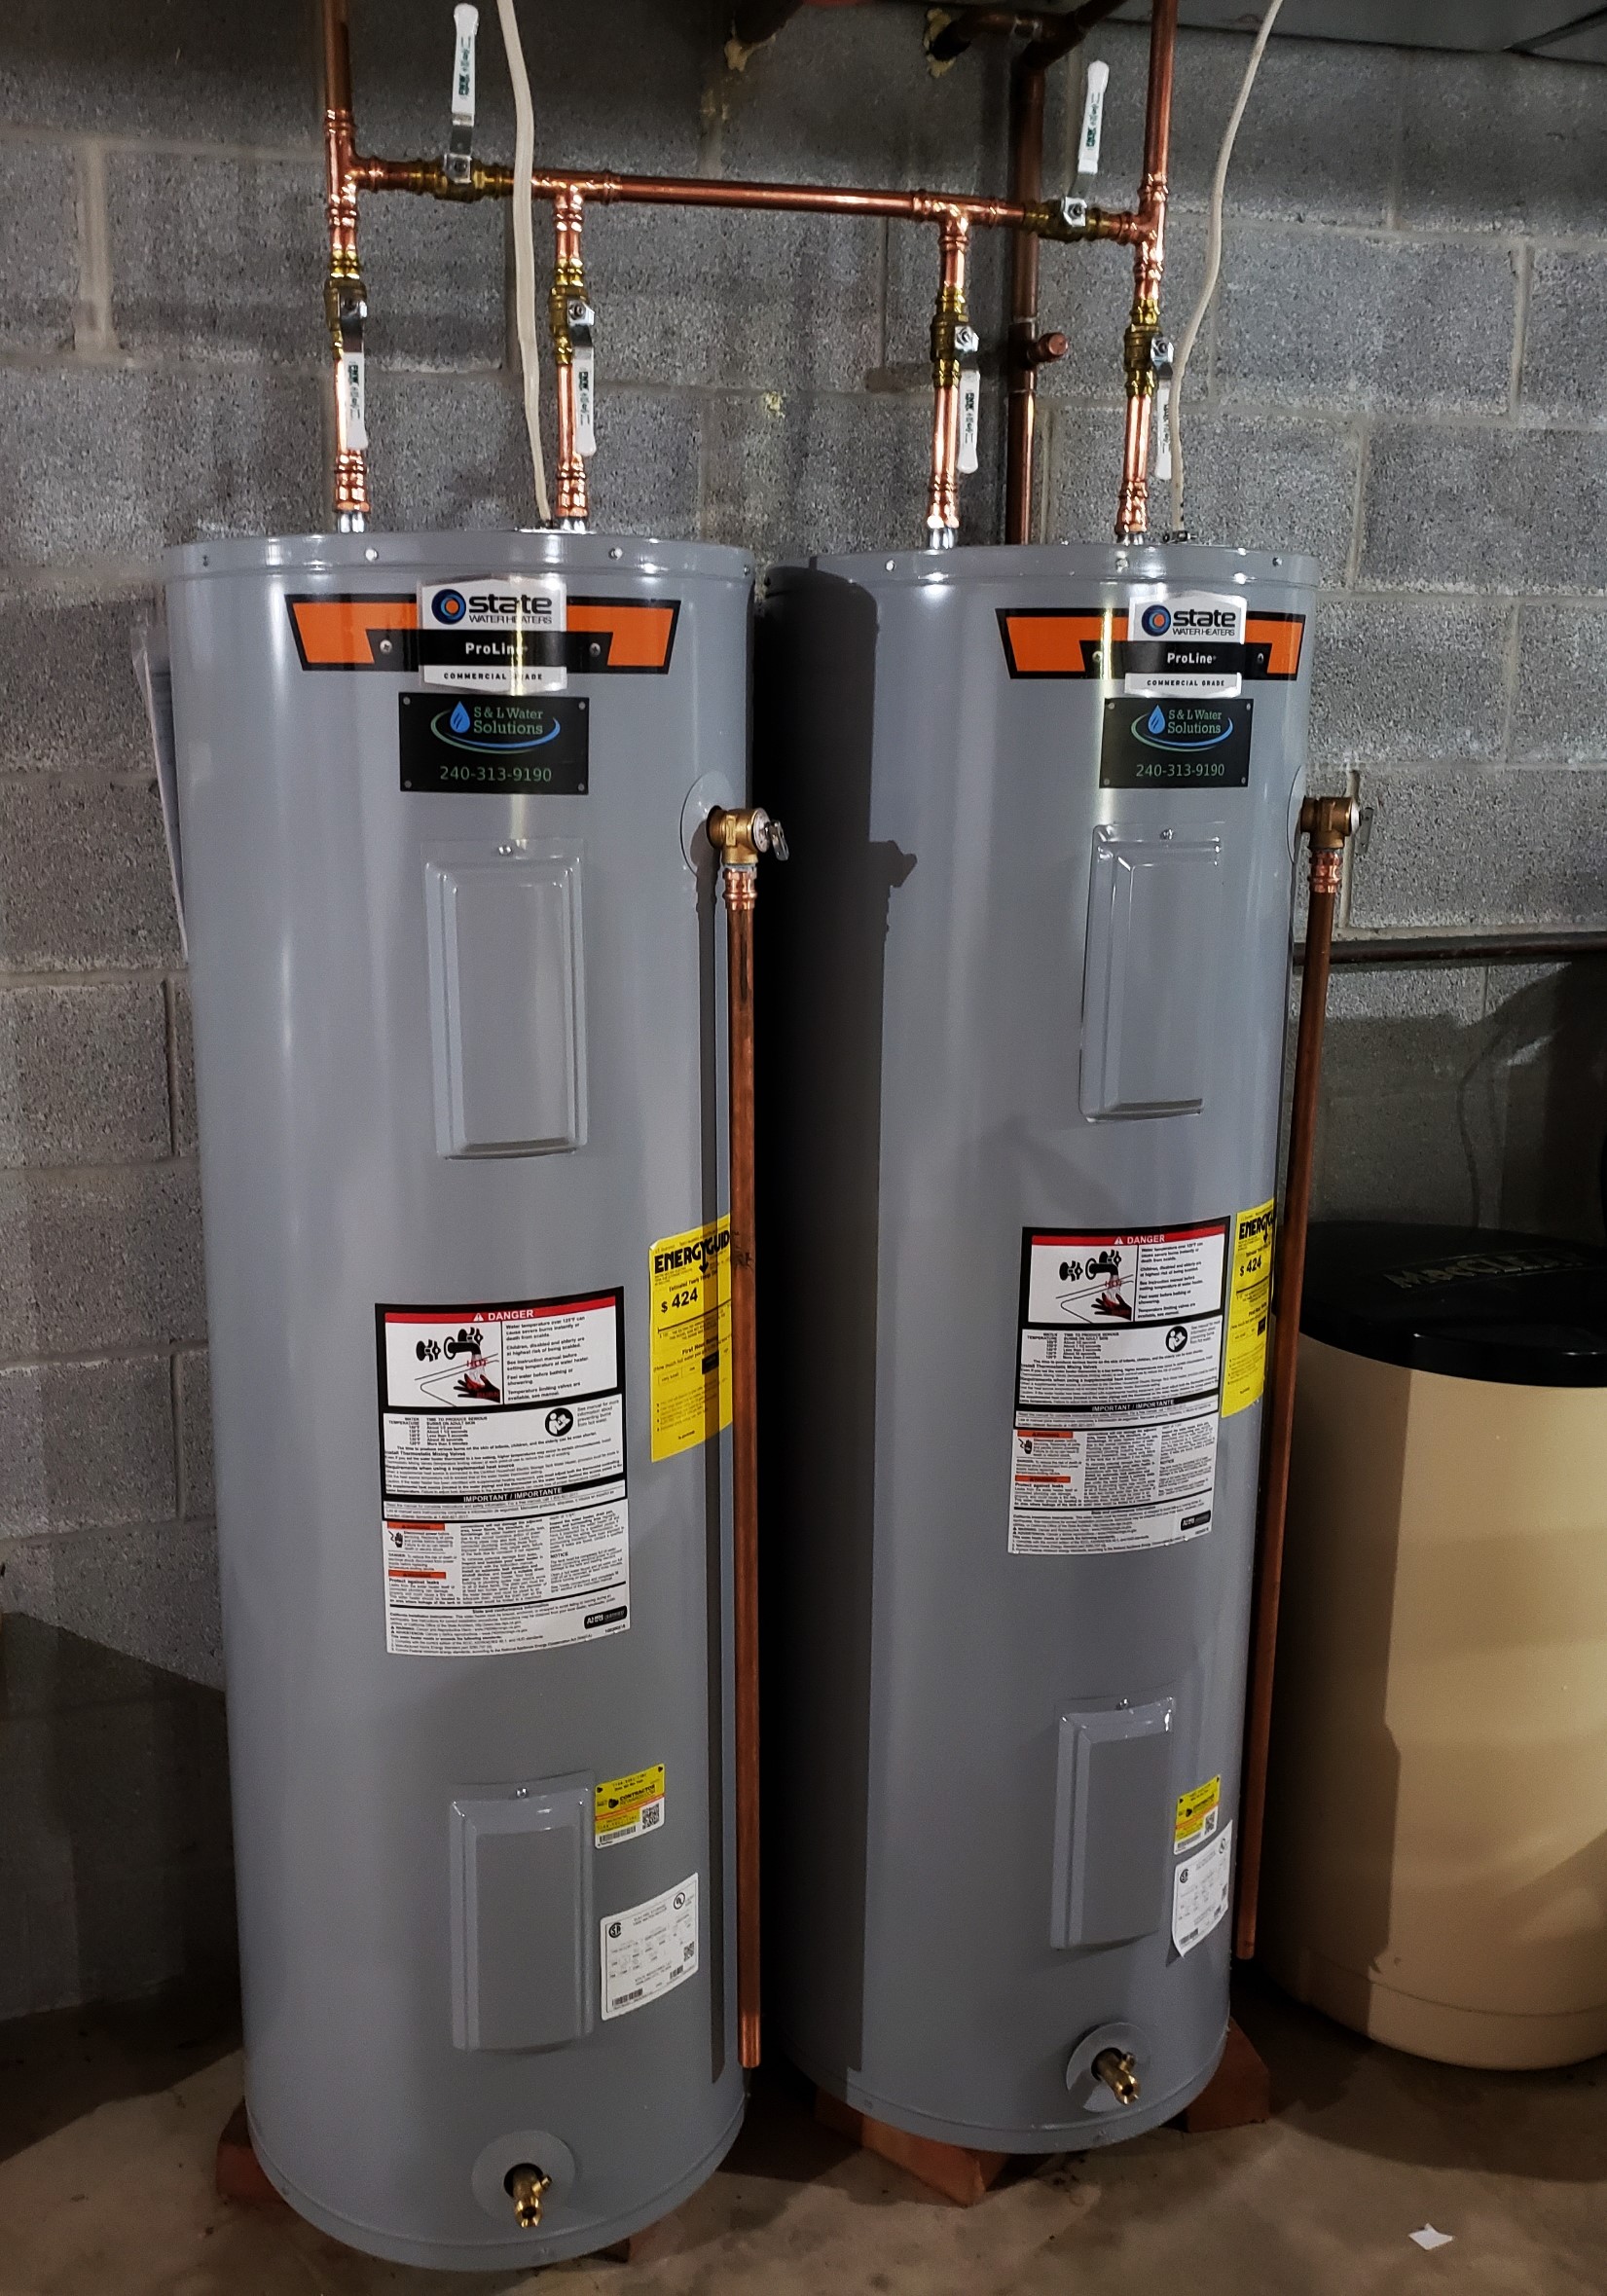 Water Heater Installation and Maintenance By DFW Plumbing Repair